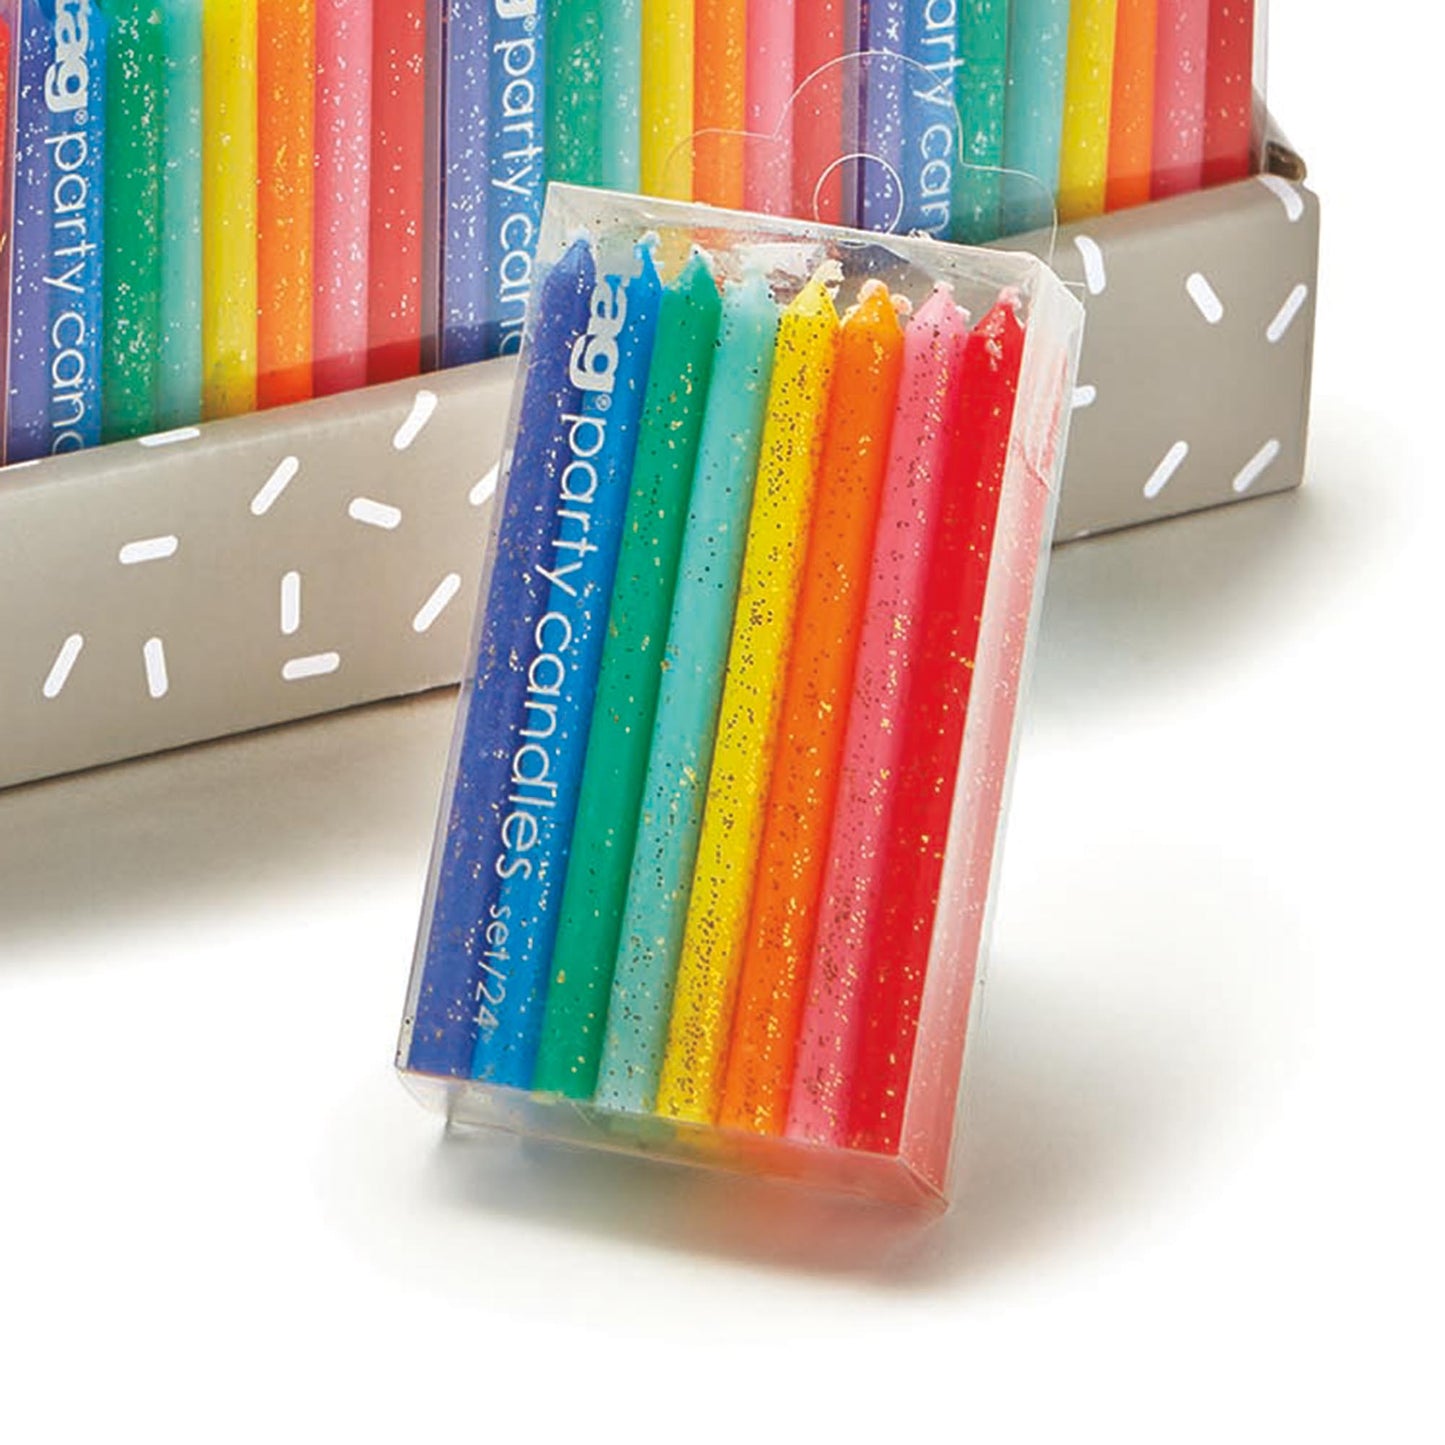 rainbow colored and glittered candles on packaging on white background.